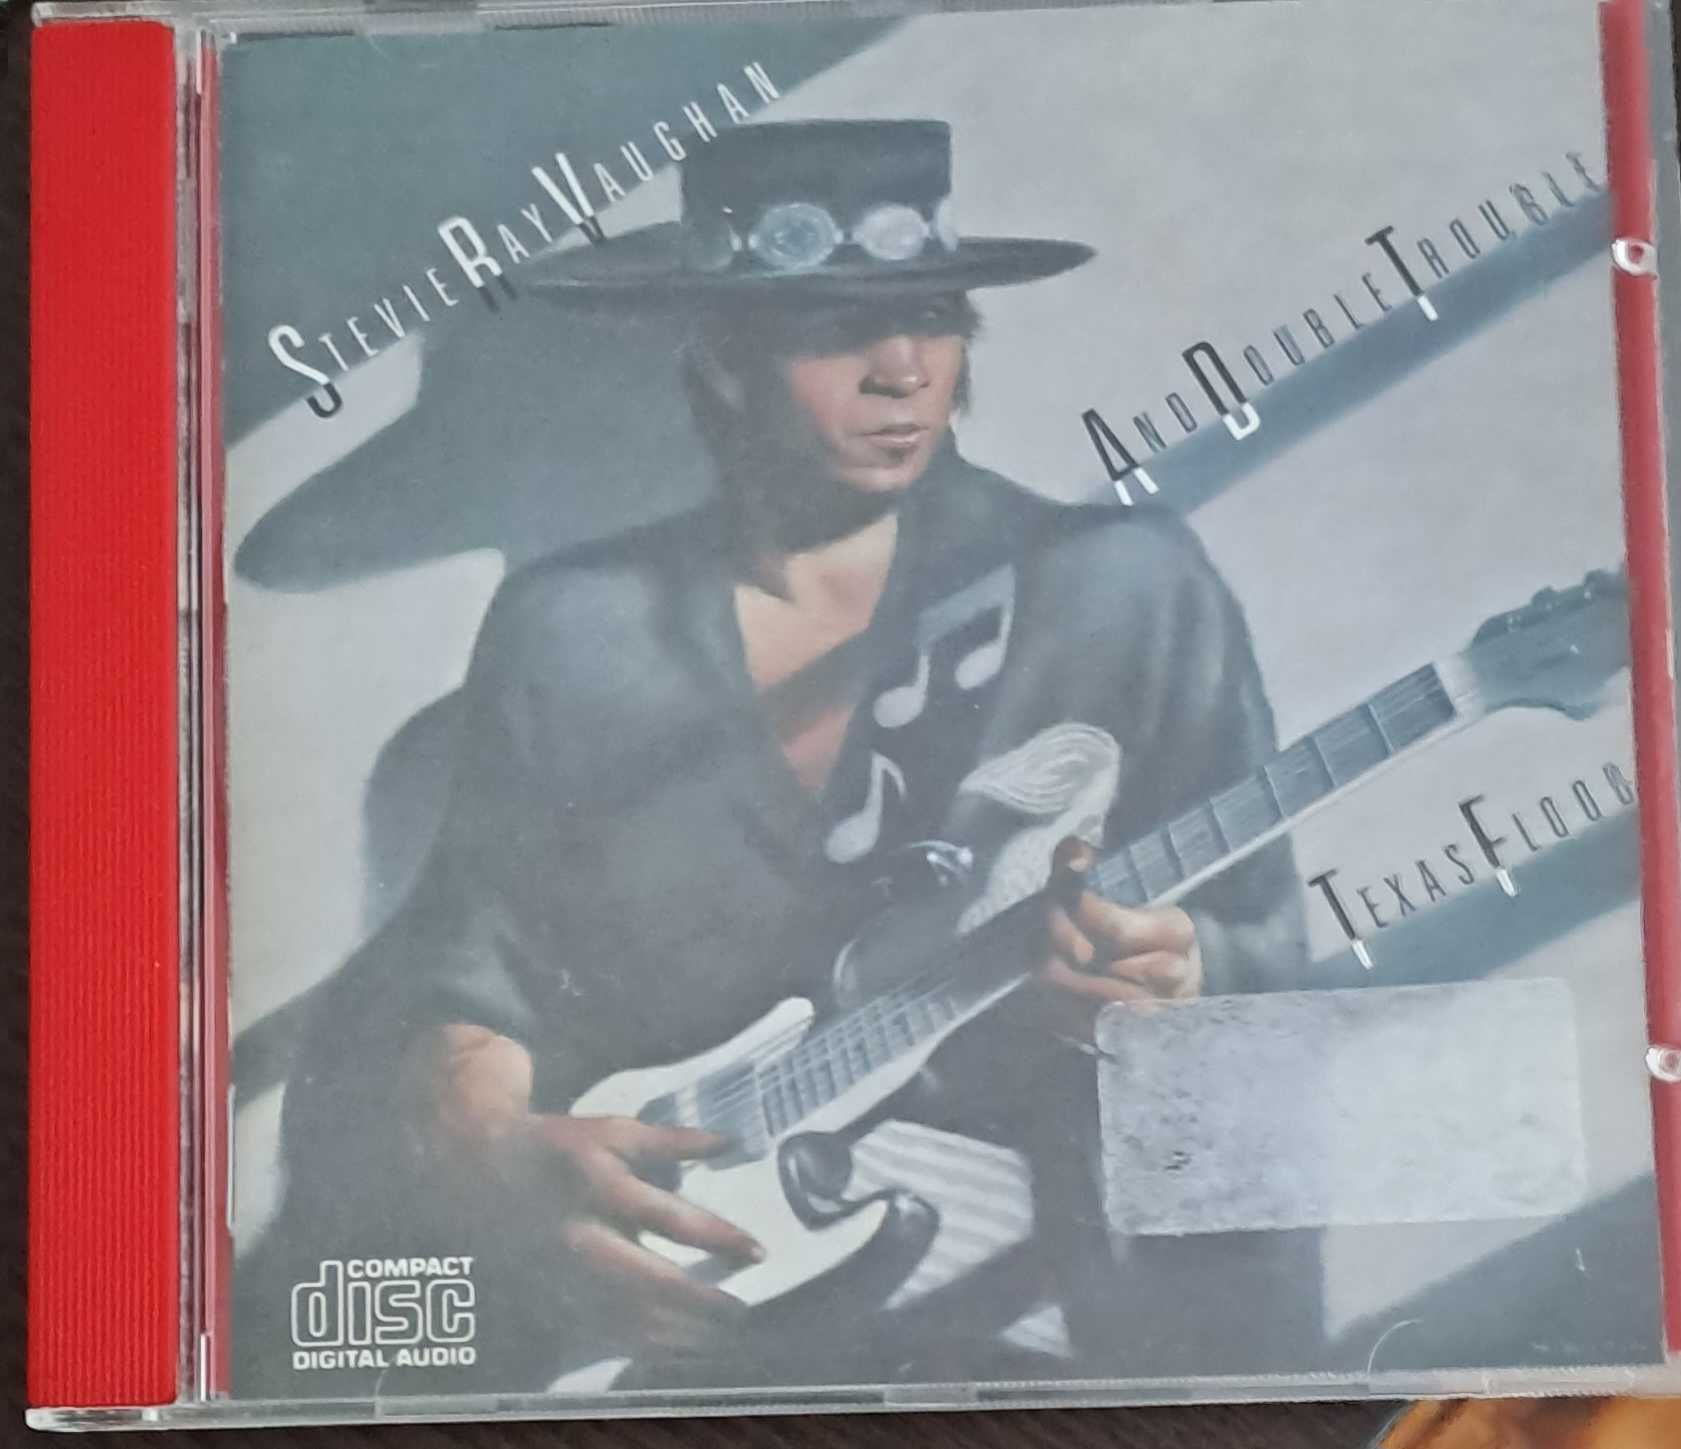 Stevie Ray Vaughan and Double Trouble - "Texas Flood"